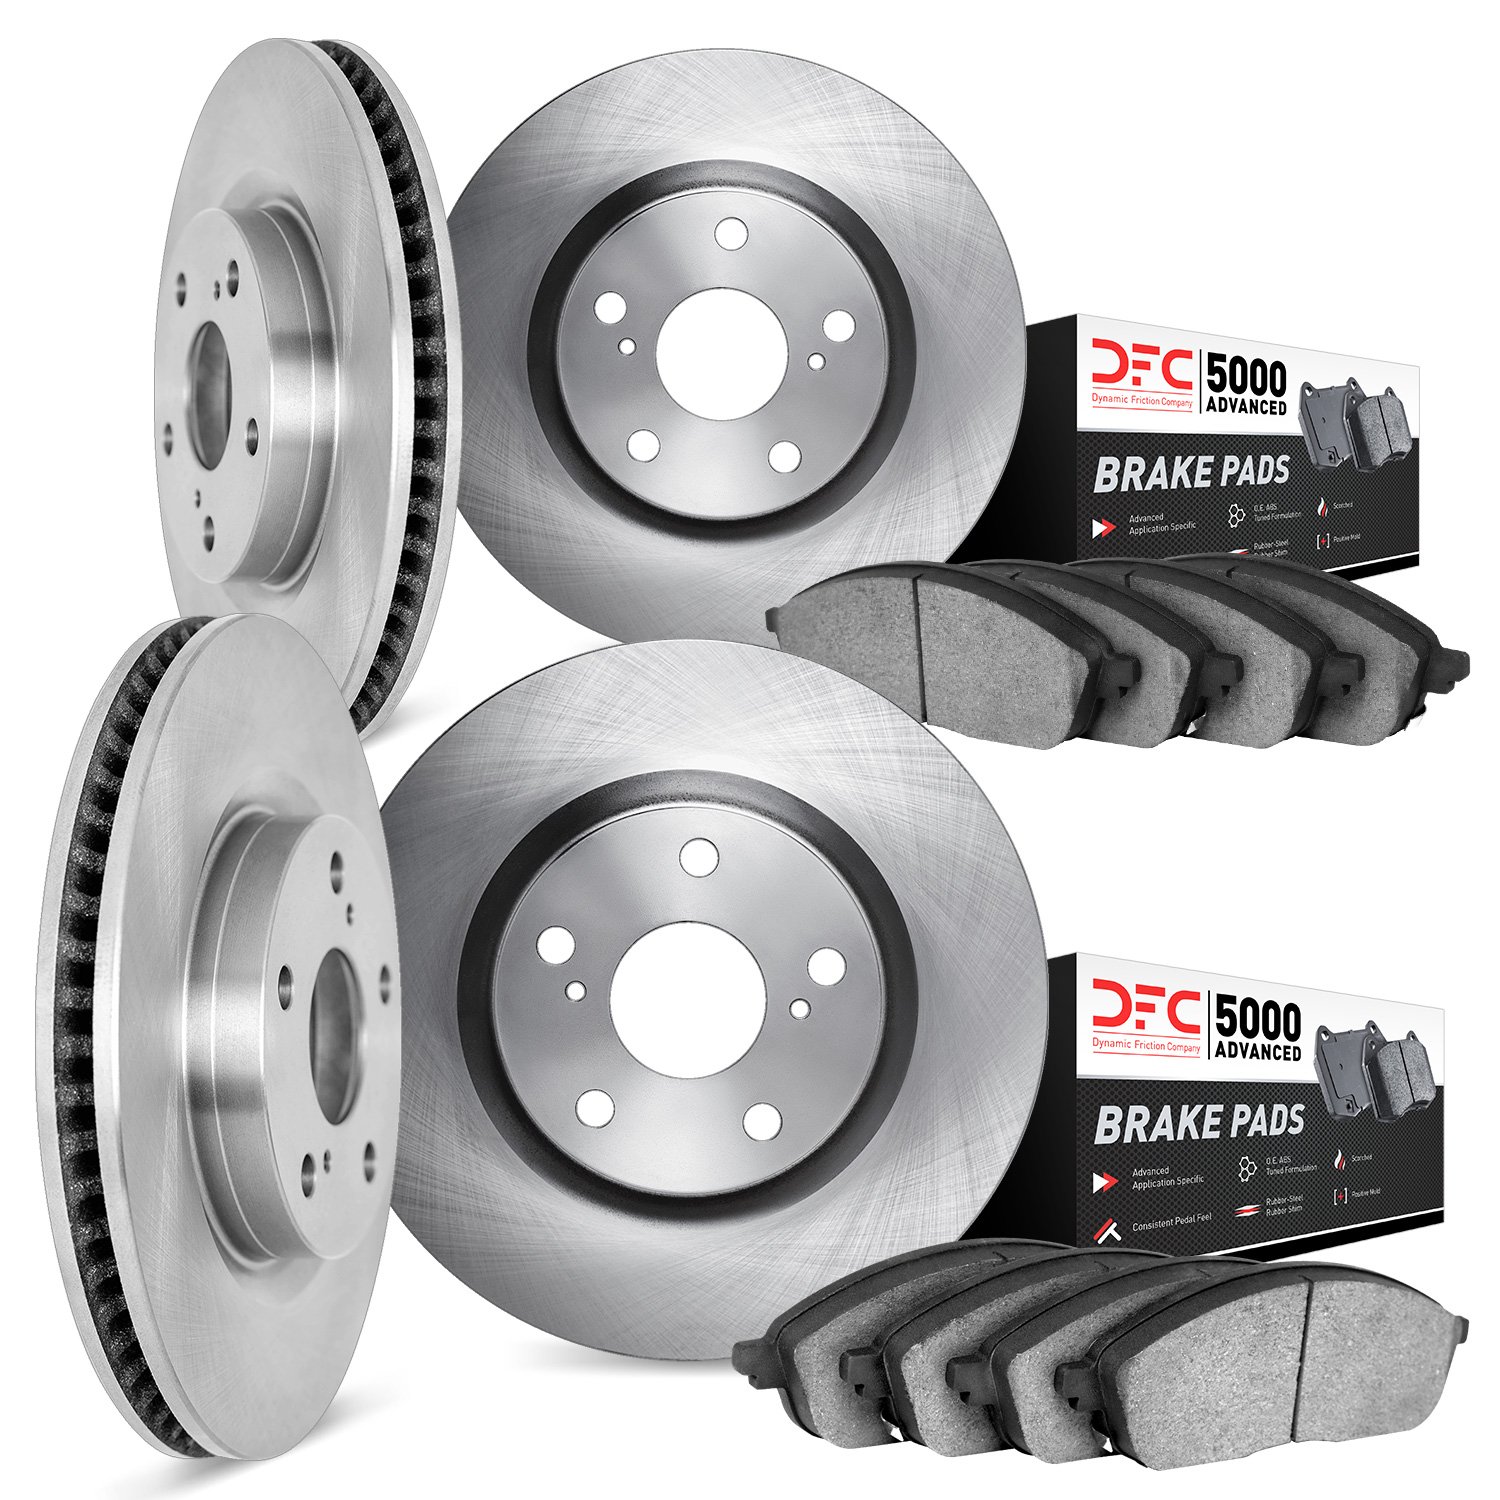 6504-31038 Brake Rotors w/5000 Advanced Brake Pads Kit, 2004-2010 BMW, Position: Front and Rear